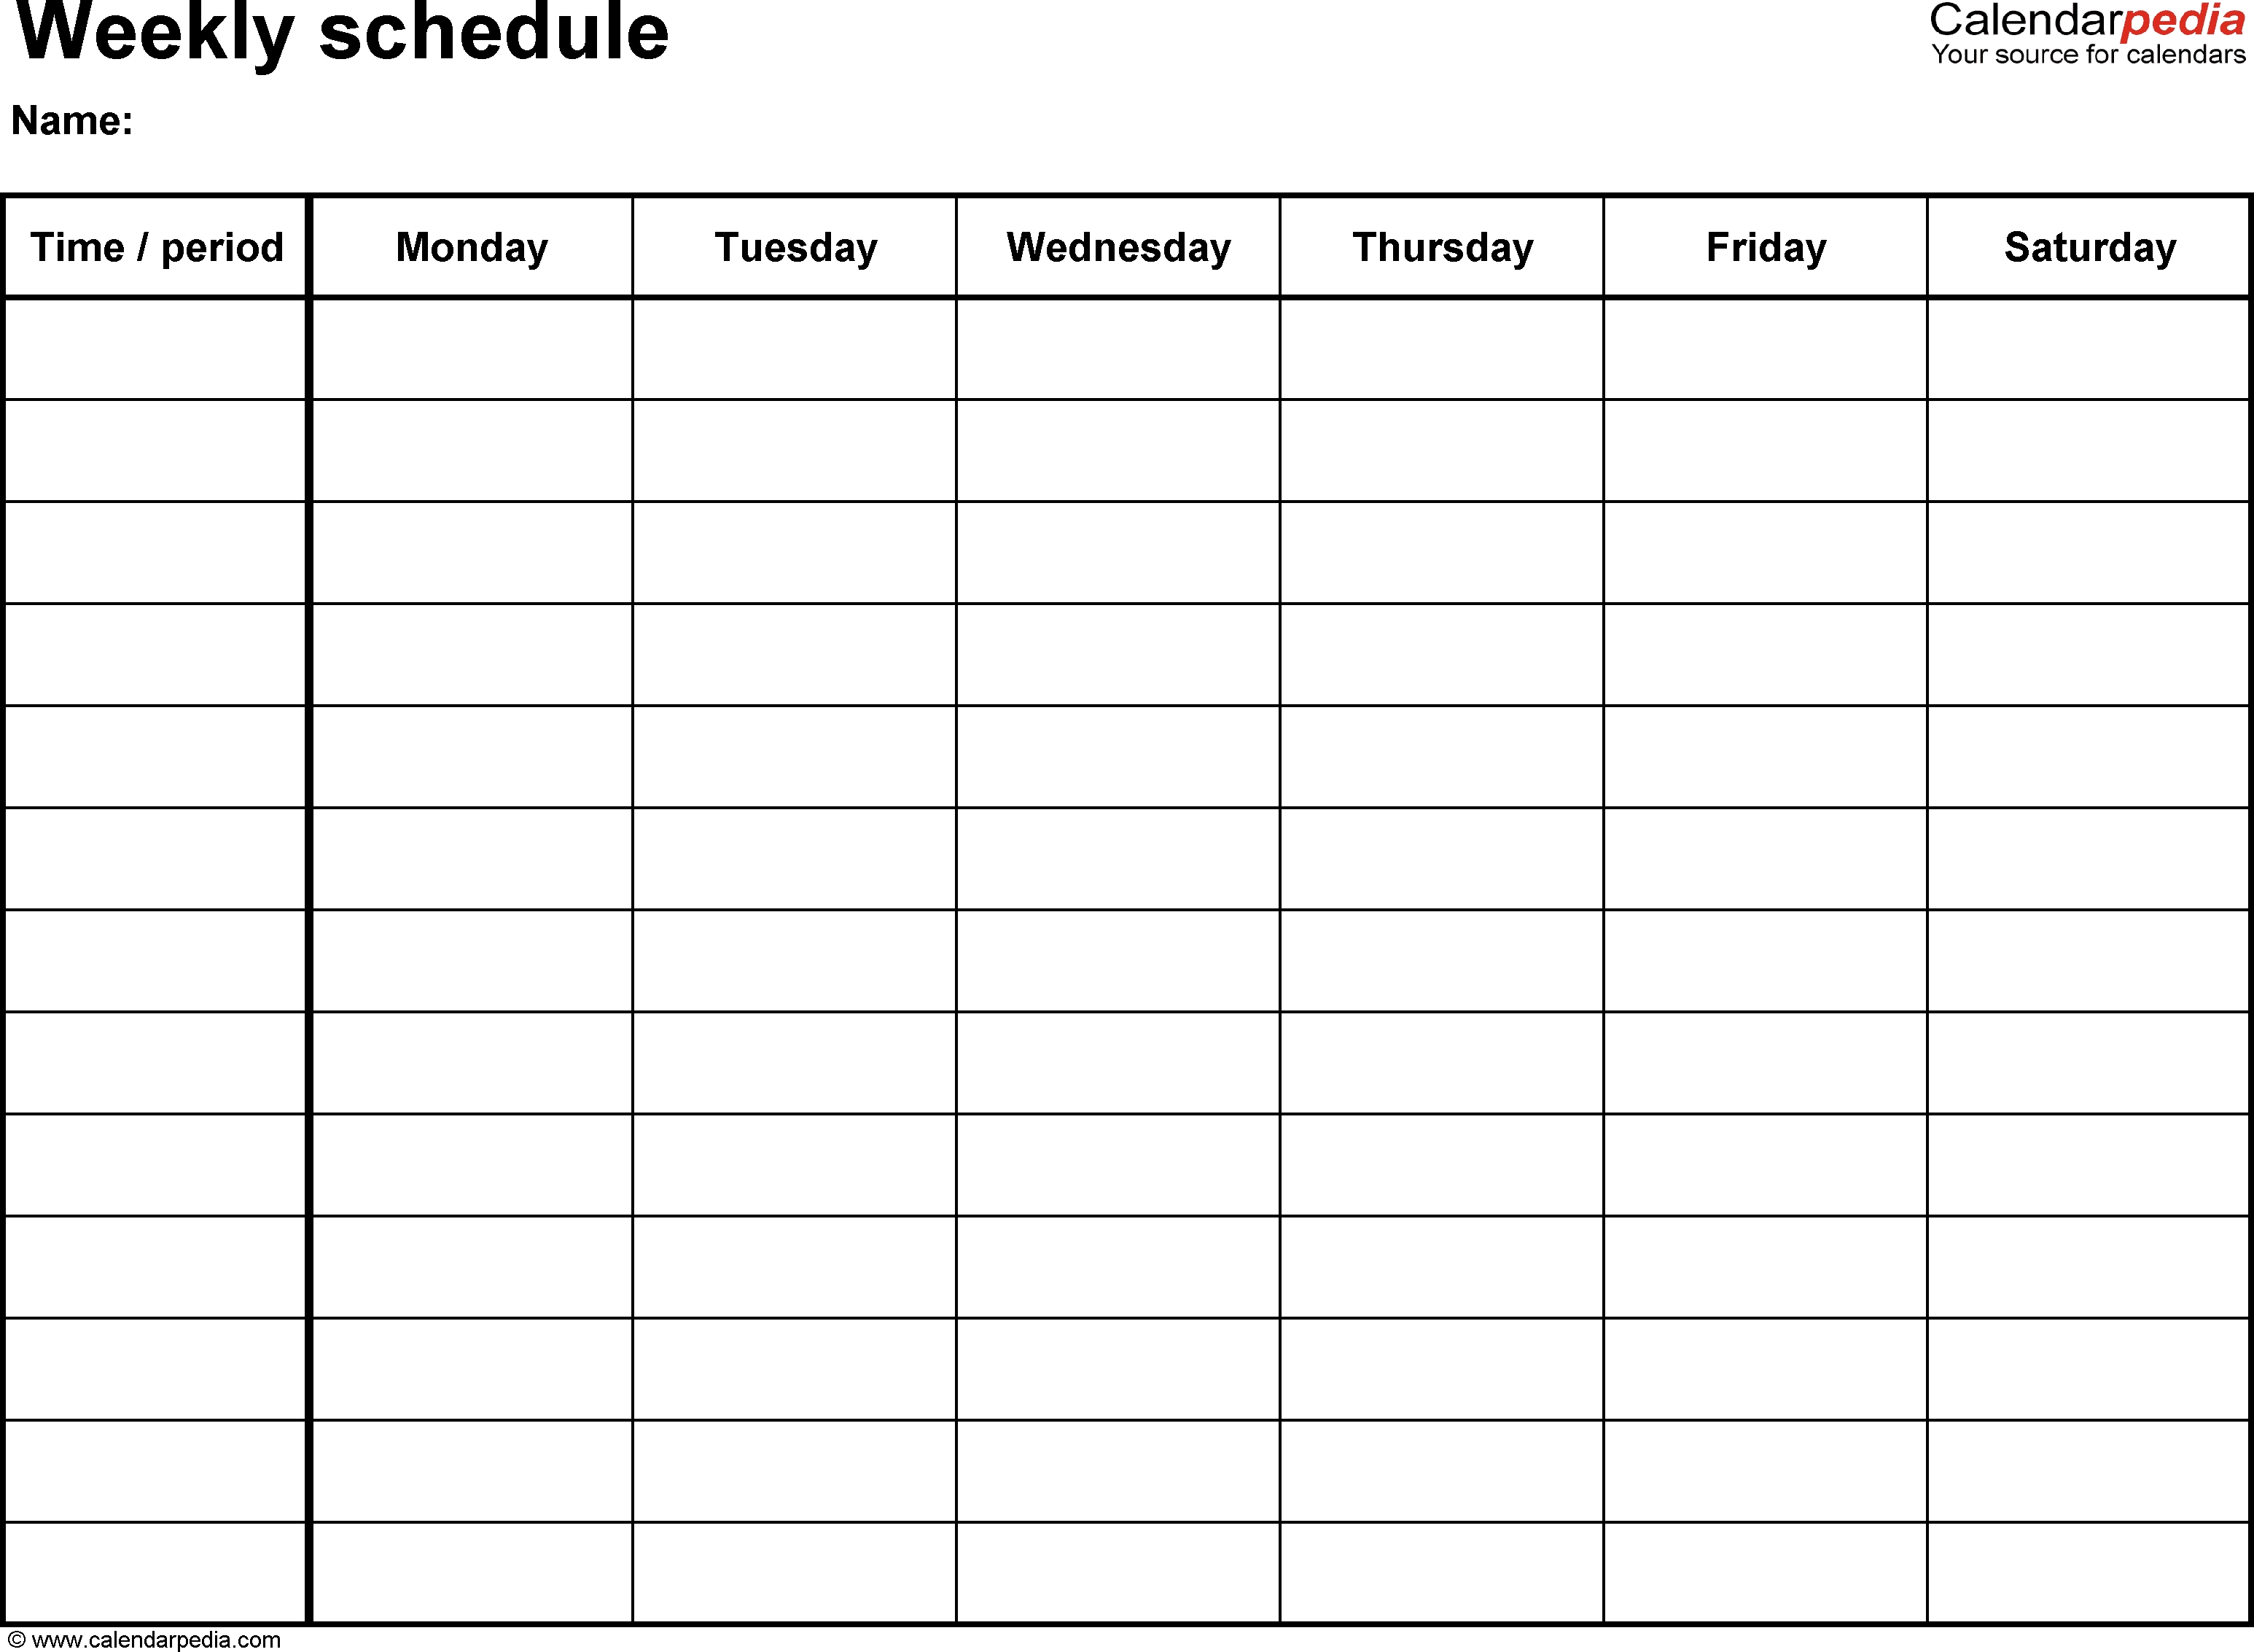 Free Weekly Schedule Templates For Pdf - 18 Templates pertaining to Blank Calendar For This Week